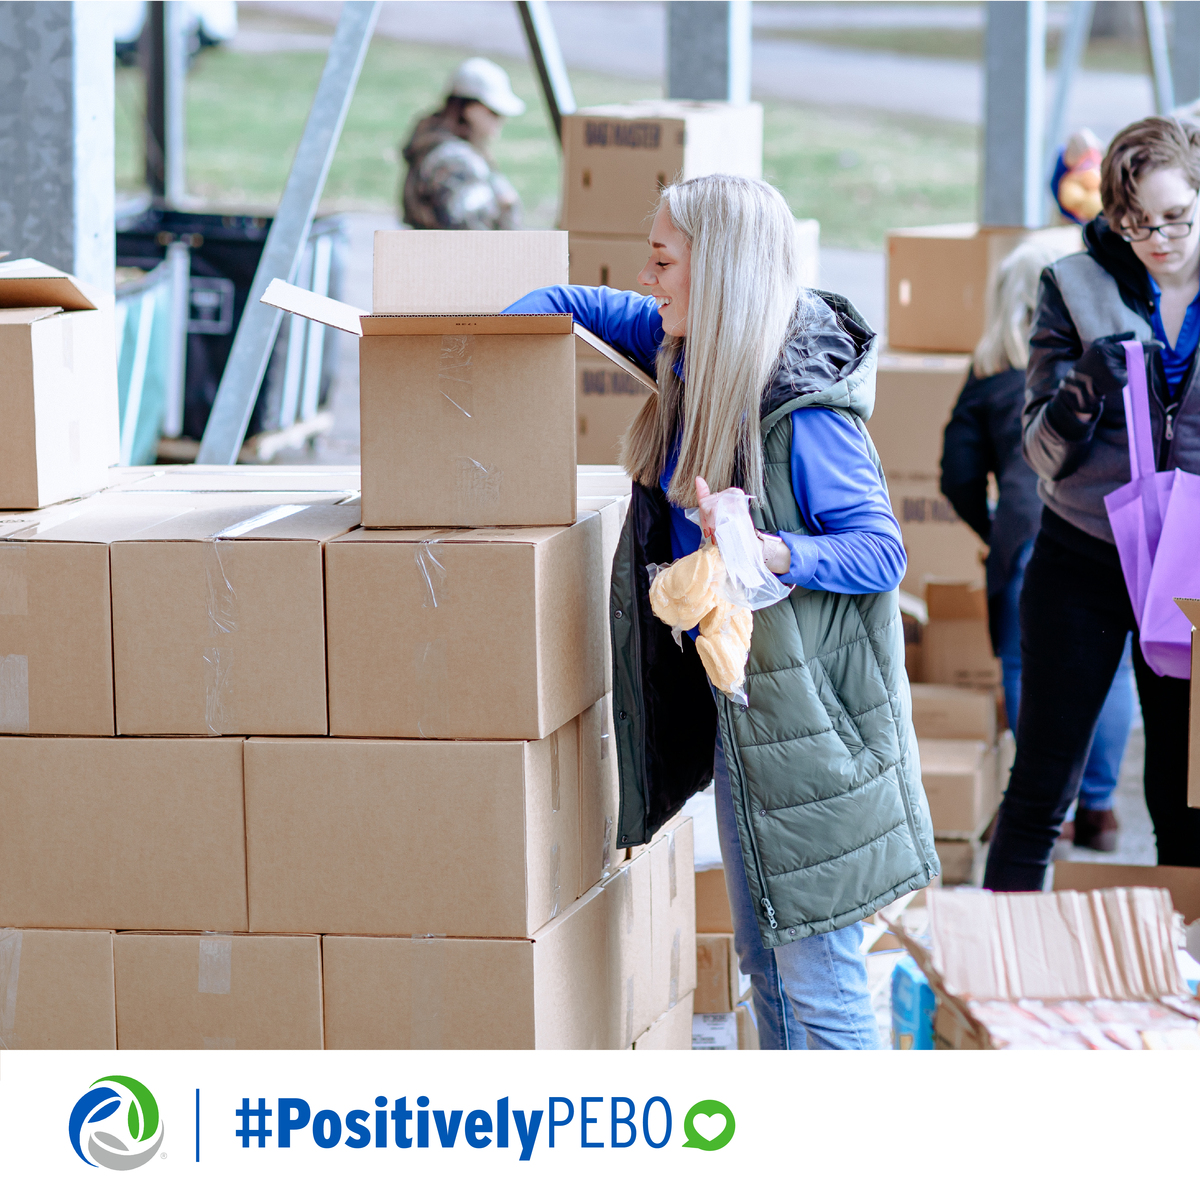 Showcasing the many different ways we are #positivelyPEBO with woman packing boxes